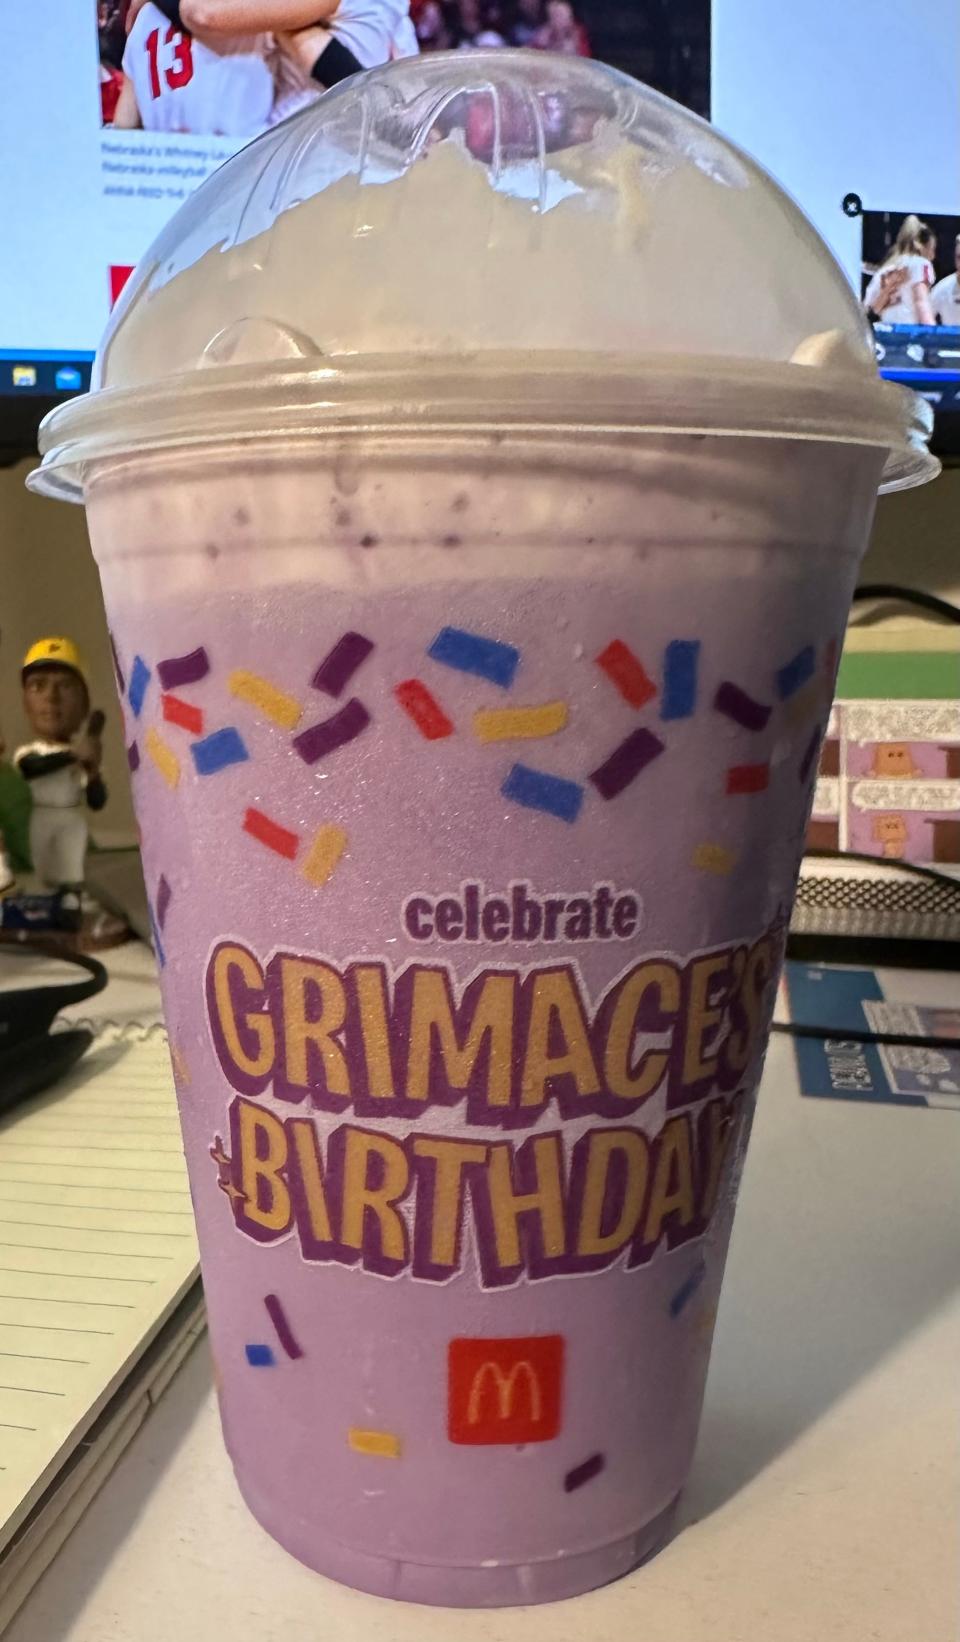 It's the Grimace Birthday Shake from McDonald's